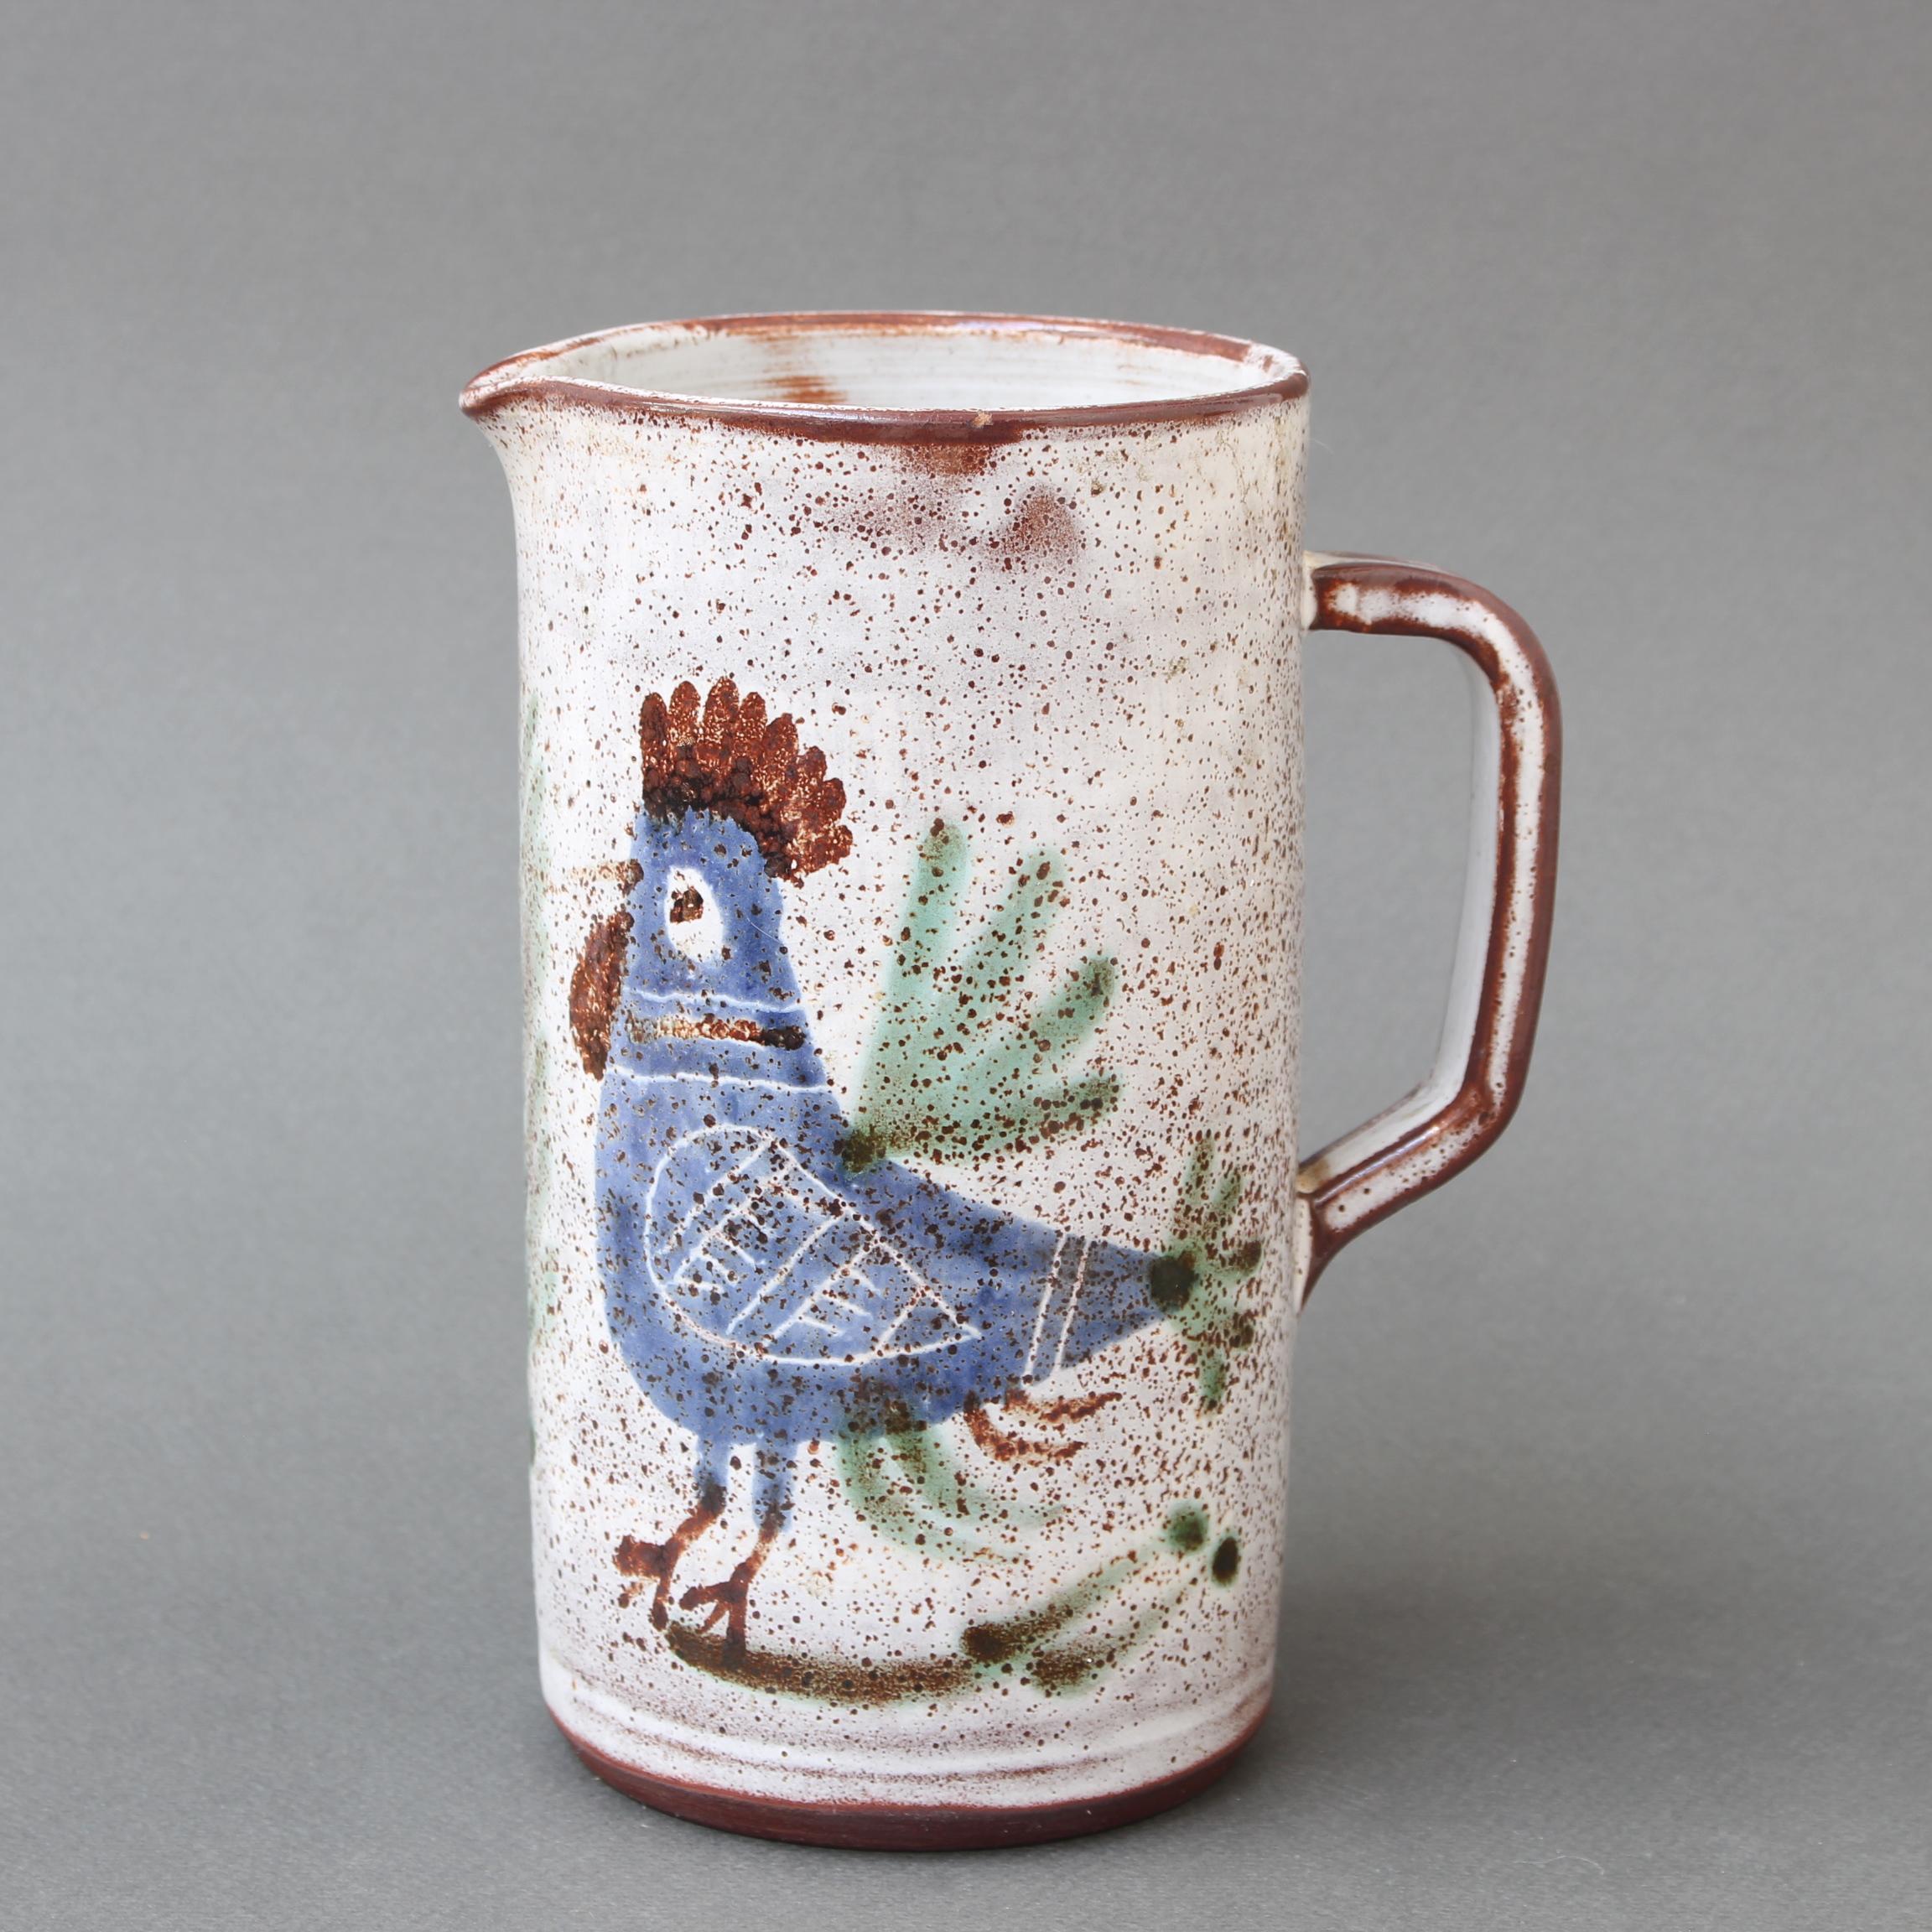 Hand-Painted Vintage French Ceramic Pitcher by Michel Barbier (circa 1960s)